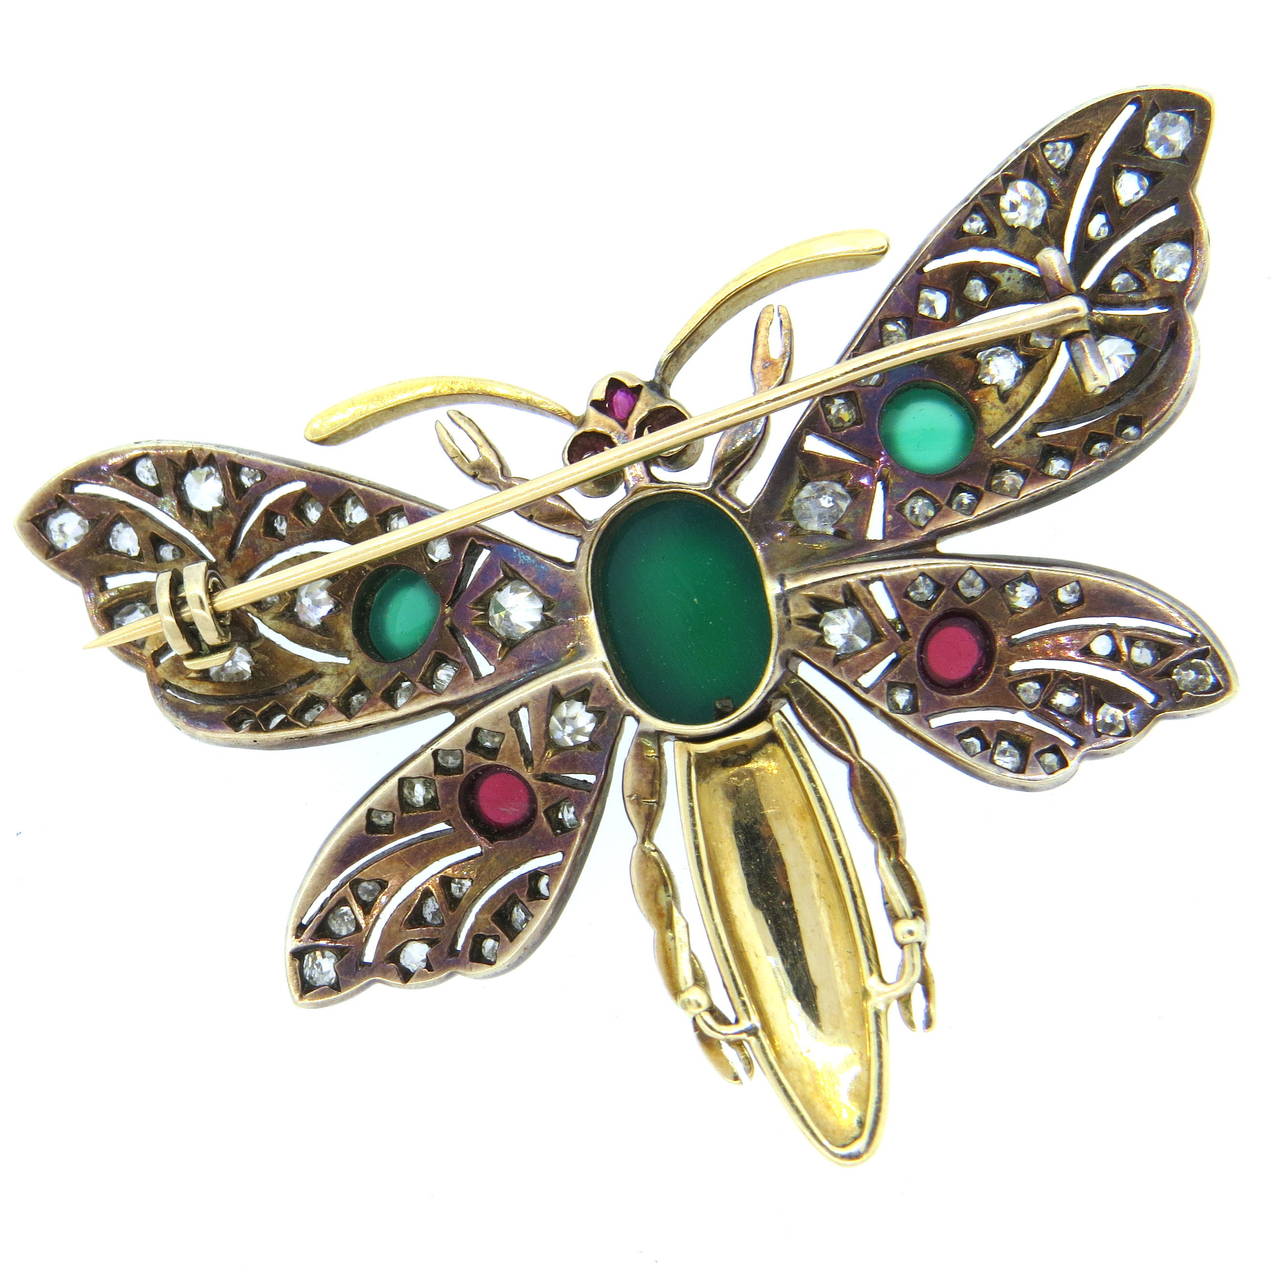 An 18k gold and silver butterfly brooch set with chrysoprase and tourmaline cabochons.  The wings are adorned with old cut and rose cut diamonds.  The brooch measures 62mm x 46mm and weighs 20.9 grams.